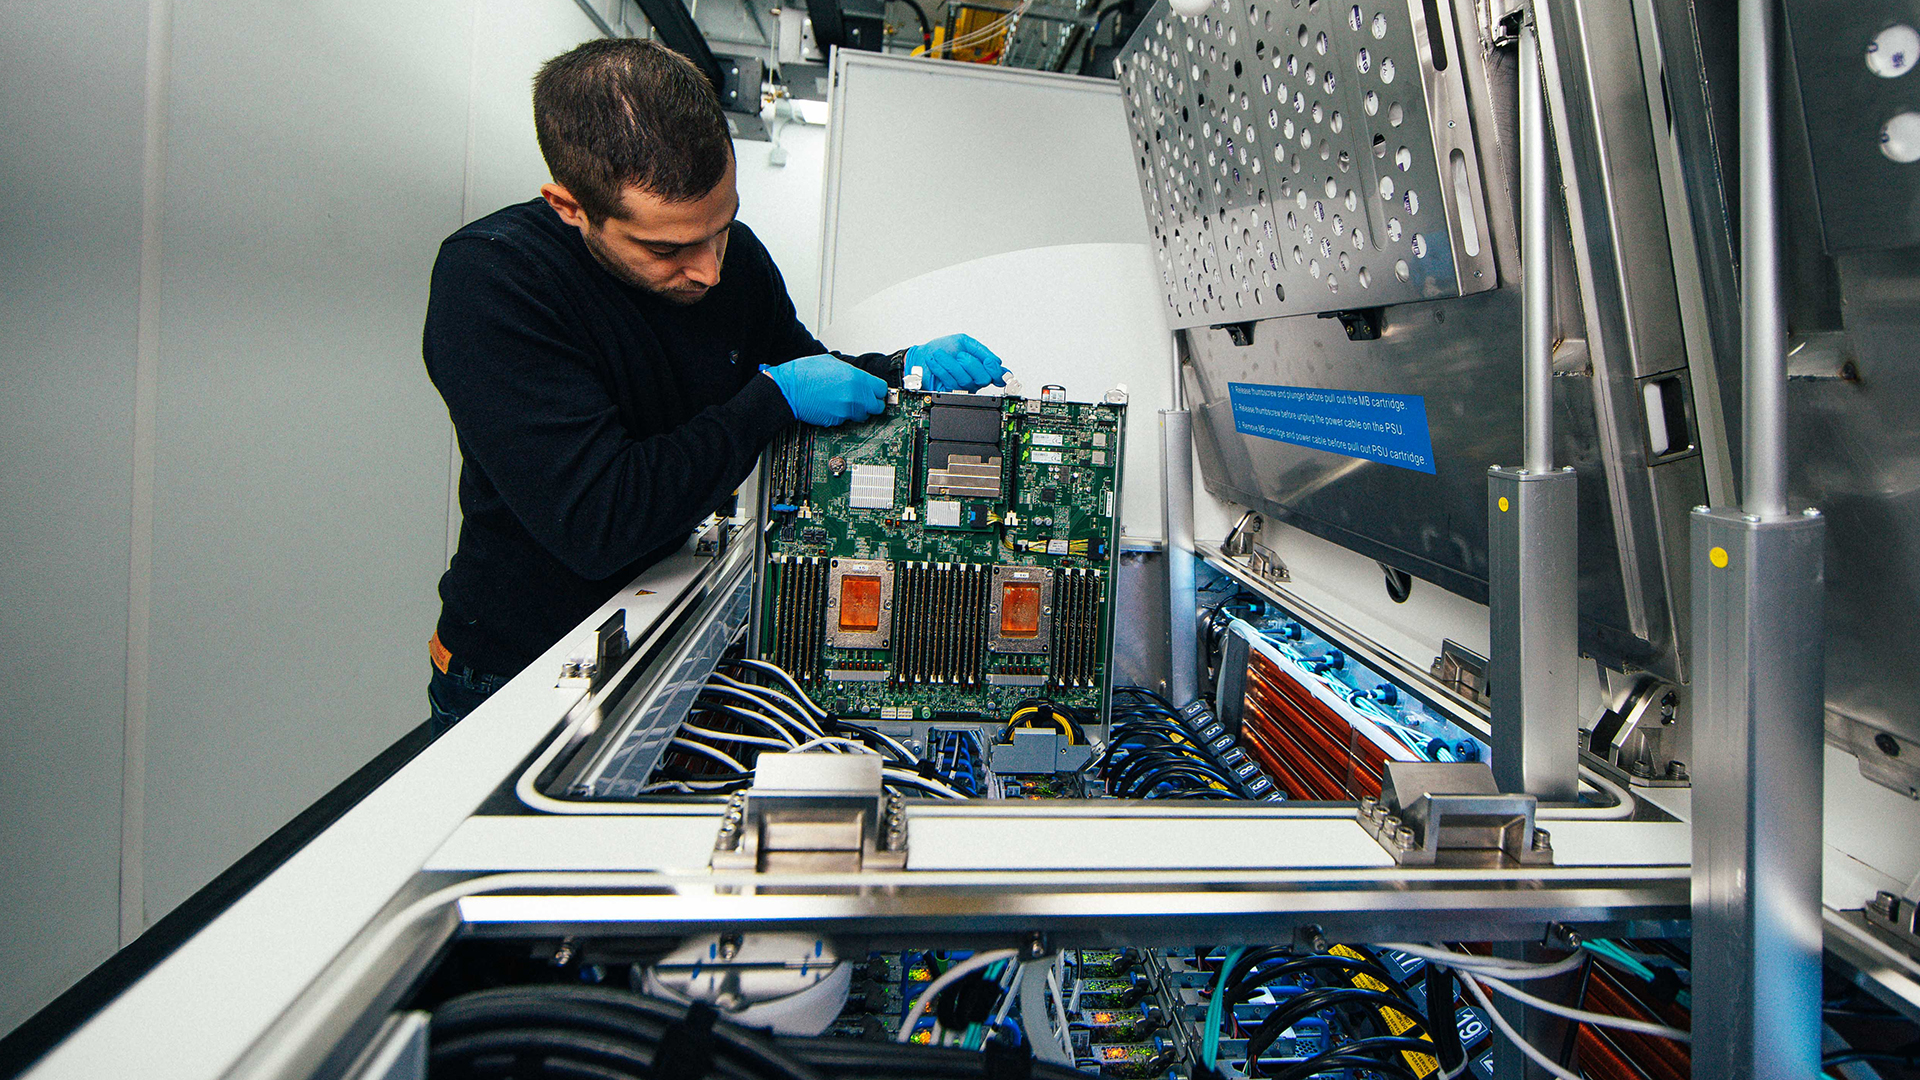 Ioannis Manousakis, a principal software engineer with Azure, removes a server blade from a two-phase immersion cooling tank at a Microsoft data center.